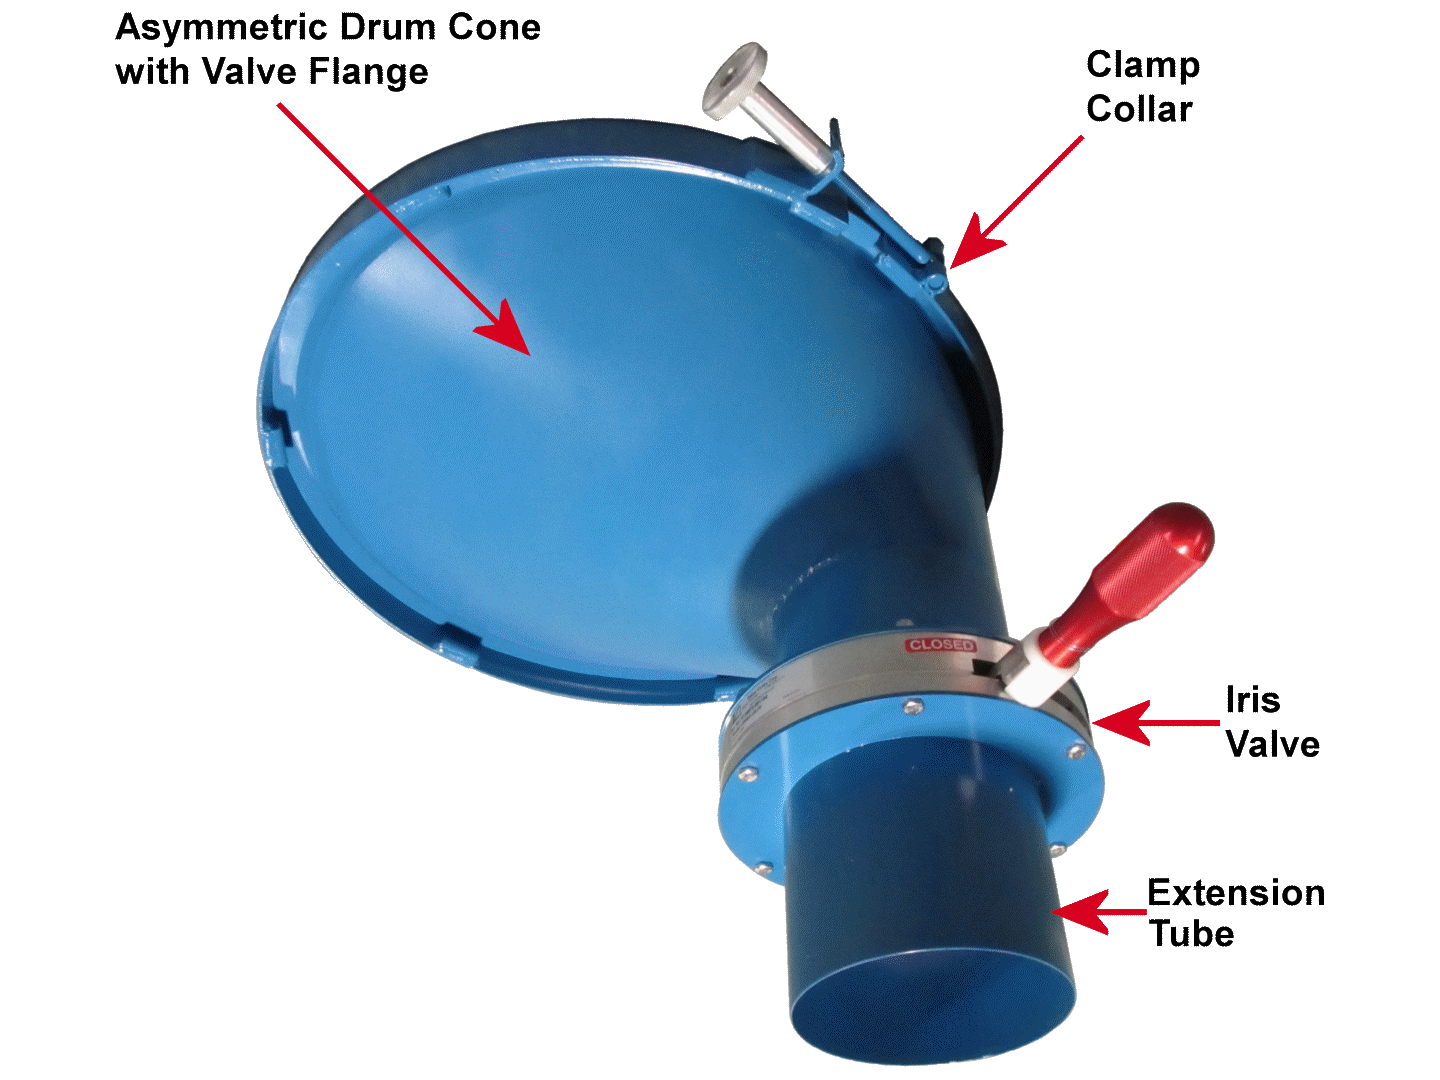 Asymmetric Drum Cone shown with Iris Valve, Extension Tube and Clamp Collar (each sold separately)